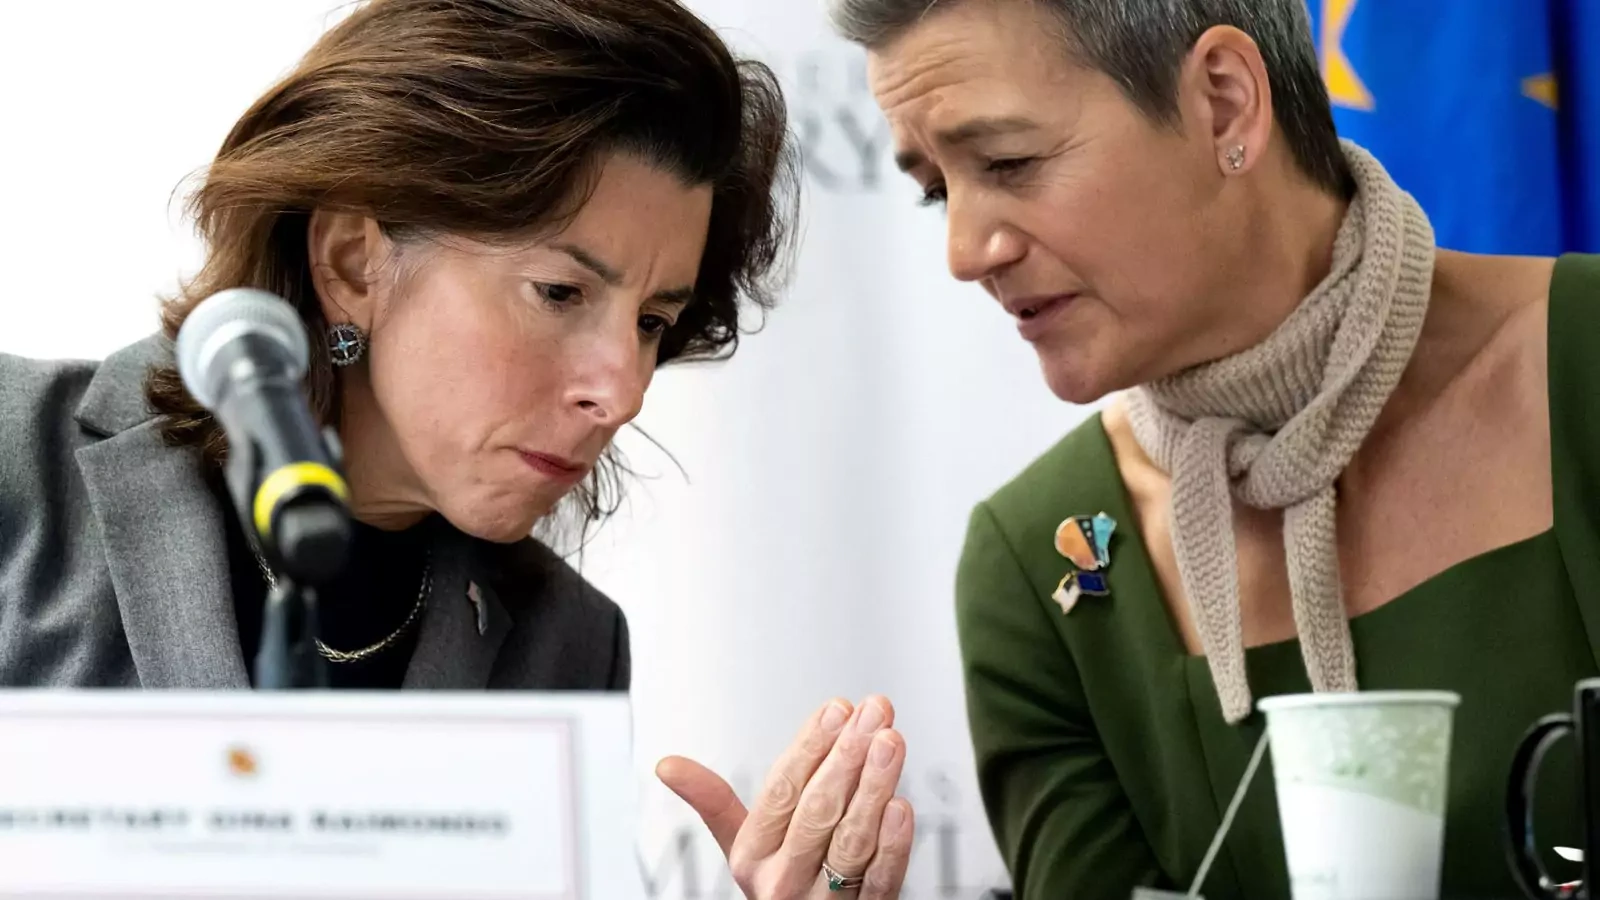 U.S. Secretary of Commerce Gina Raimondo and European Commission Executive Vice-President Margrethe Vestager participate in a U.S.-EU Stakeholder Dialogue during the Trade and Technology Council Ministerial Meeting at the University of Maryland.